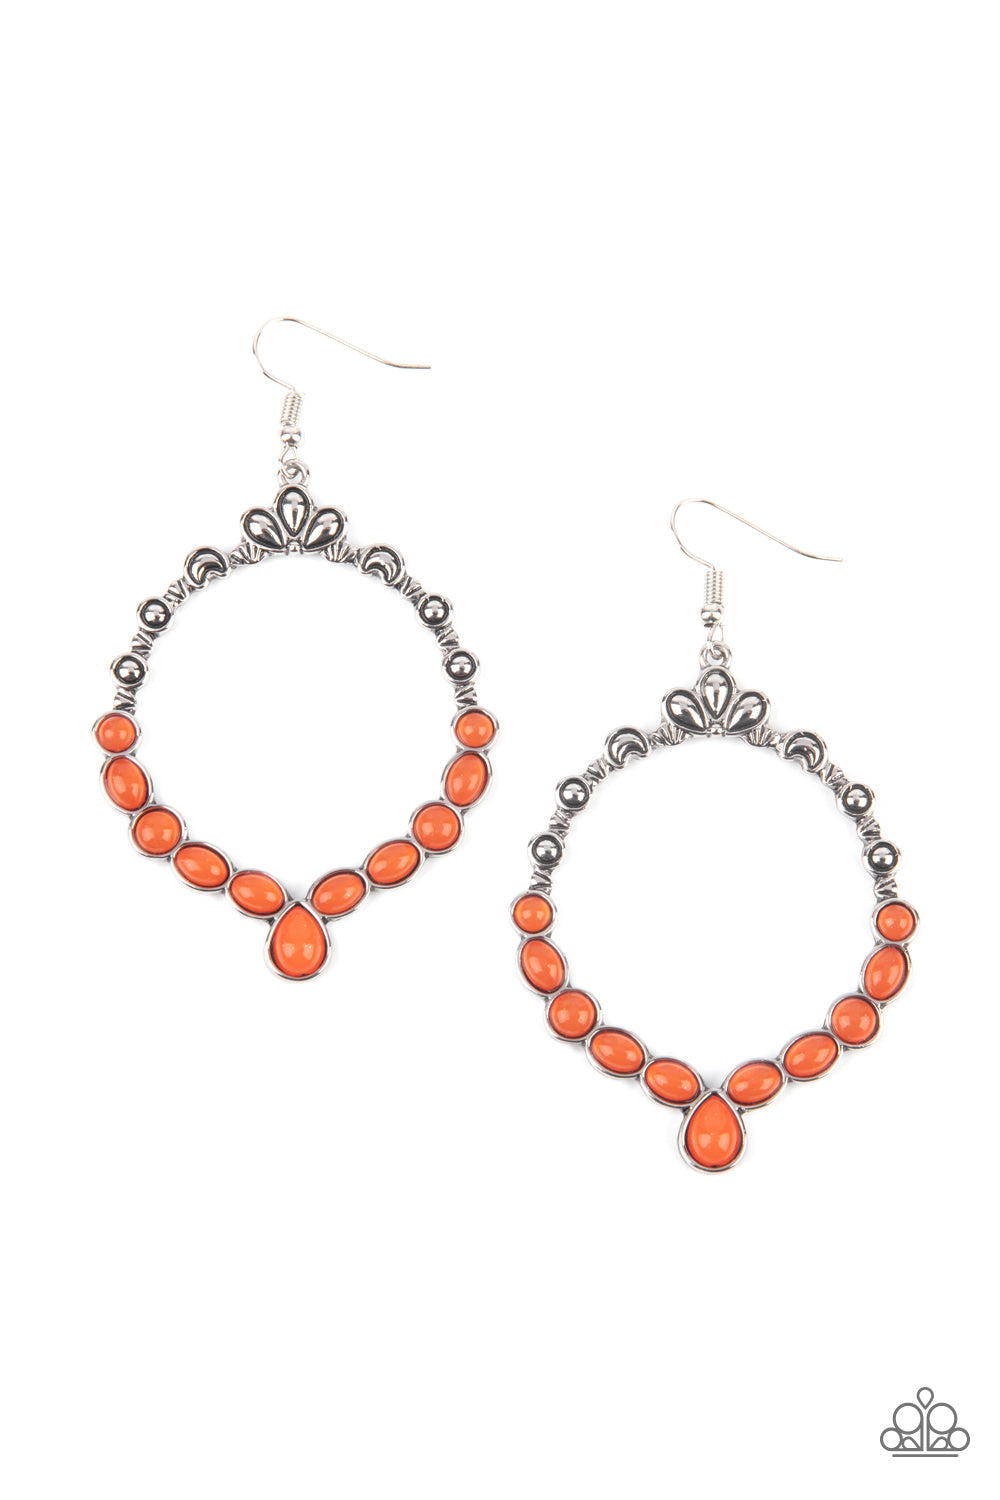 Thai Treasures - Orange Circular Earrings ornate floral motifs decorate the top half of an airy circular silver frame. A row of dewy orange oval and round beads creates a border along the lower half of the frame, culminating in a single teardrop accent for a demurely enchanting lure. Earring attaches to a standard fishhook fitting.  Sold as one pair of earrings.  Paparazzi Jewelry is lead and nickel free so it's perfect for sensitive skin too!